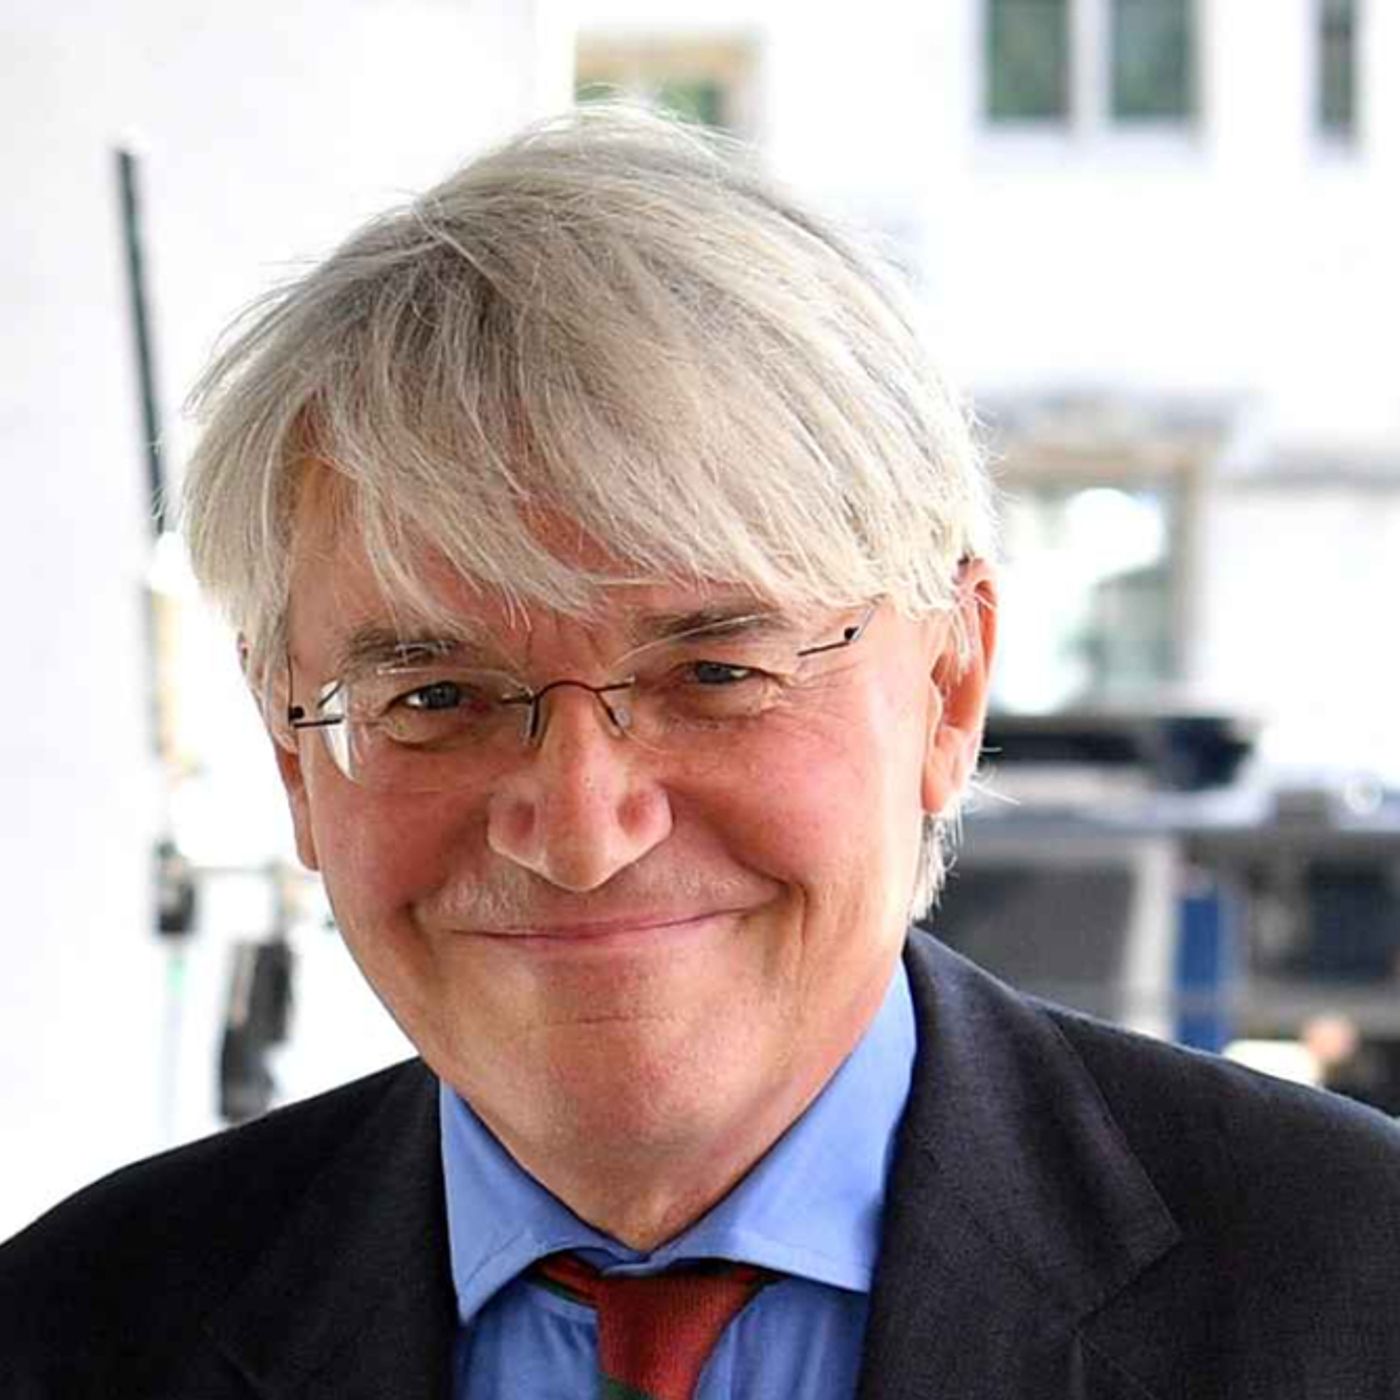 S2 Ep13: The Reaction Podcast: Andrew Mitchell, interest rates, and Owen Paterson